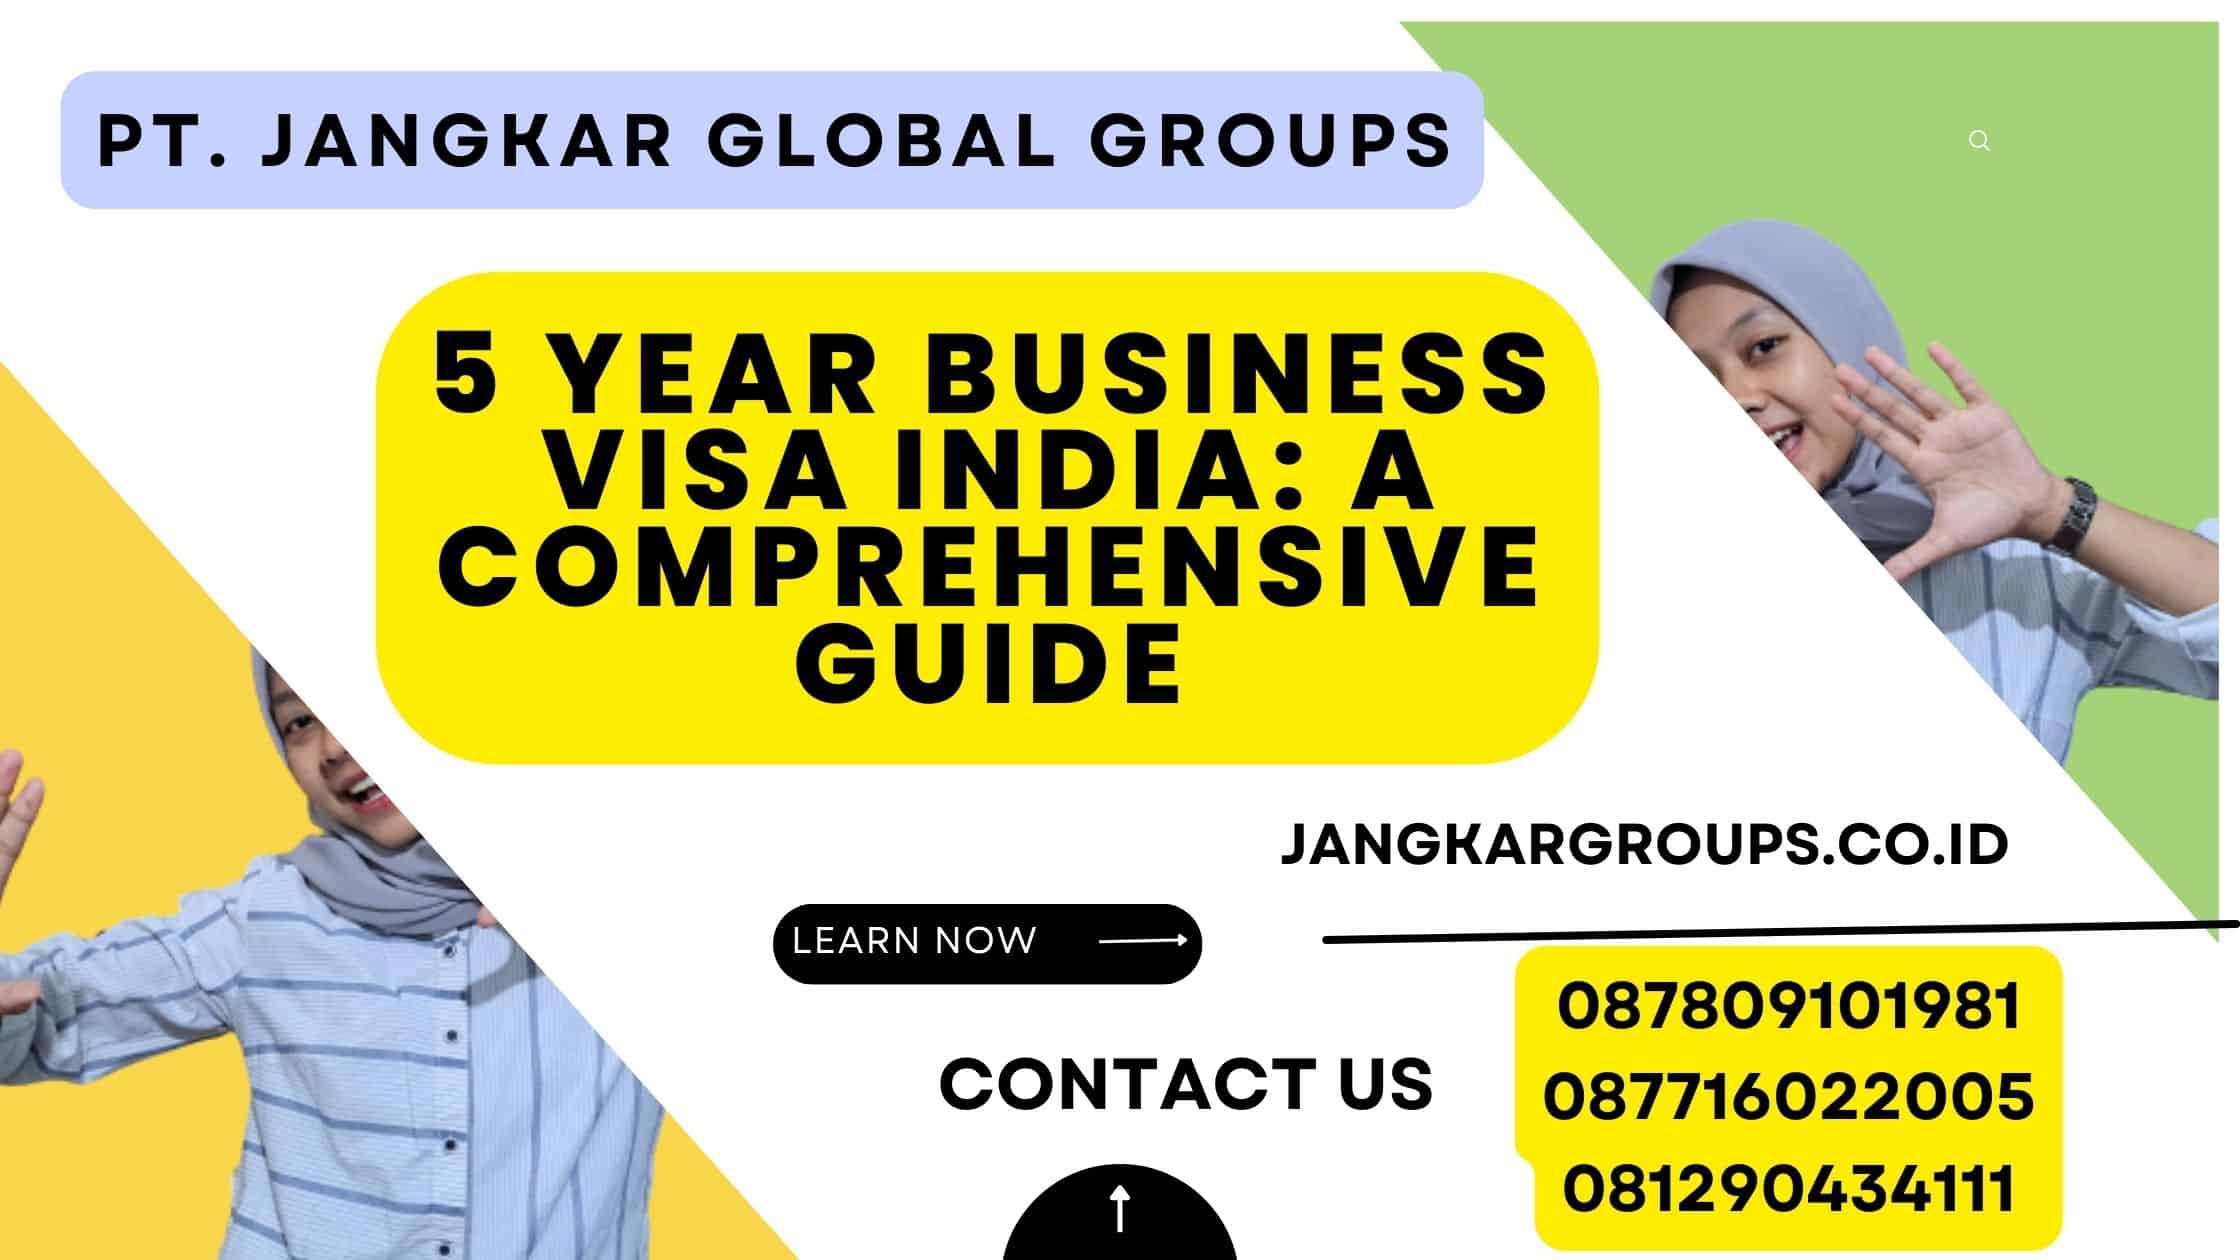 5 Year Business Visa India: A Comprehensive Guide